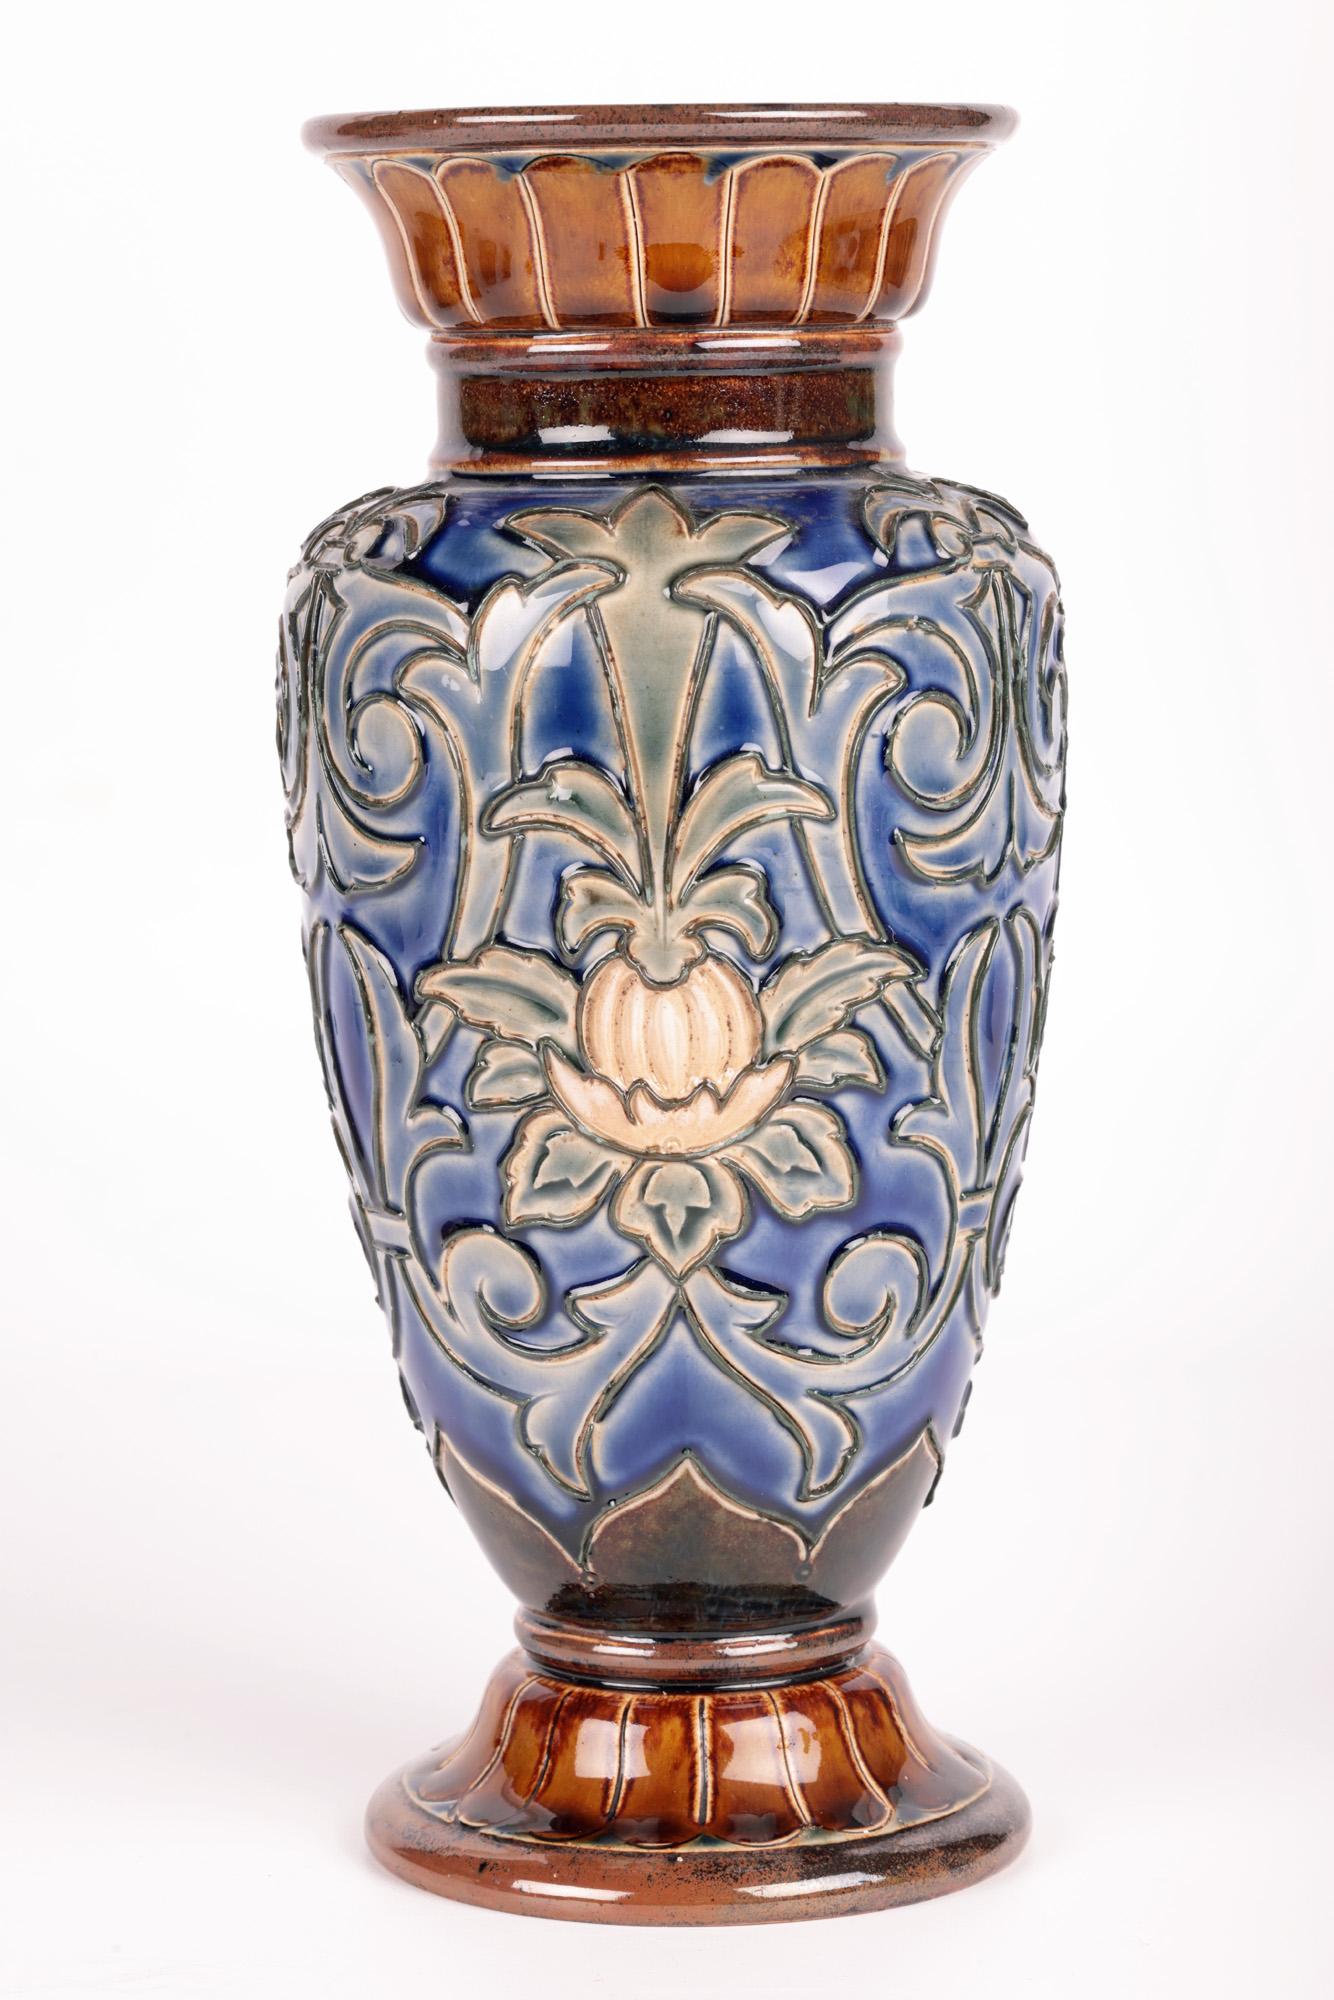 Hand-Painted Doulton Lambeth Stylized Floral Design Vase by Eliza Simmance